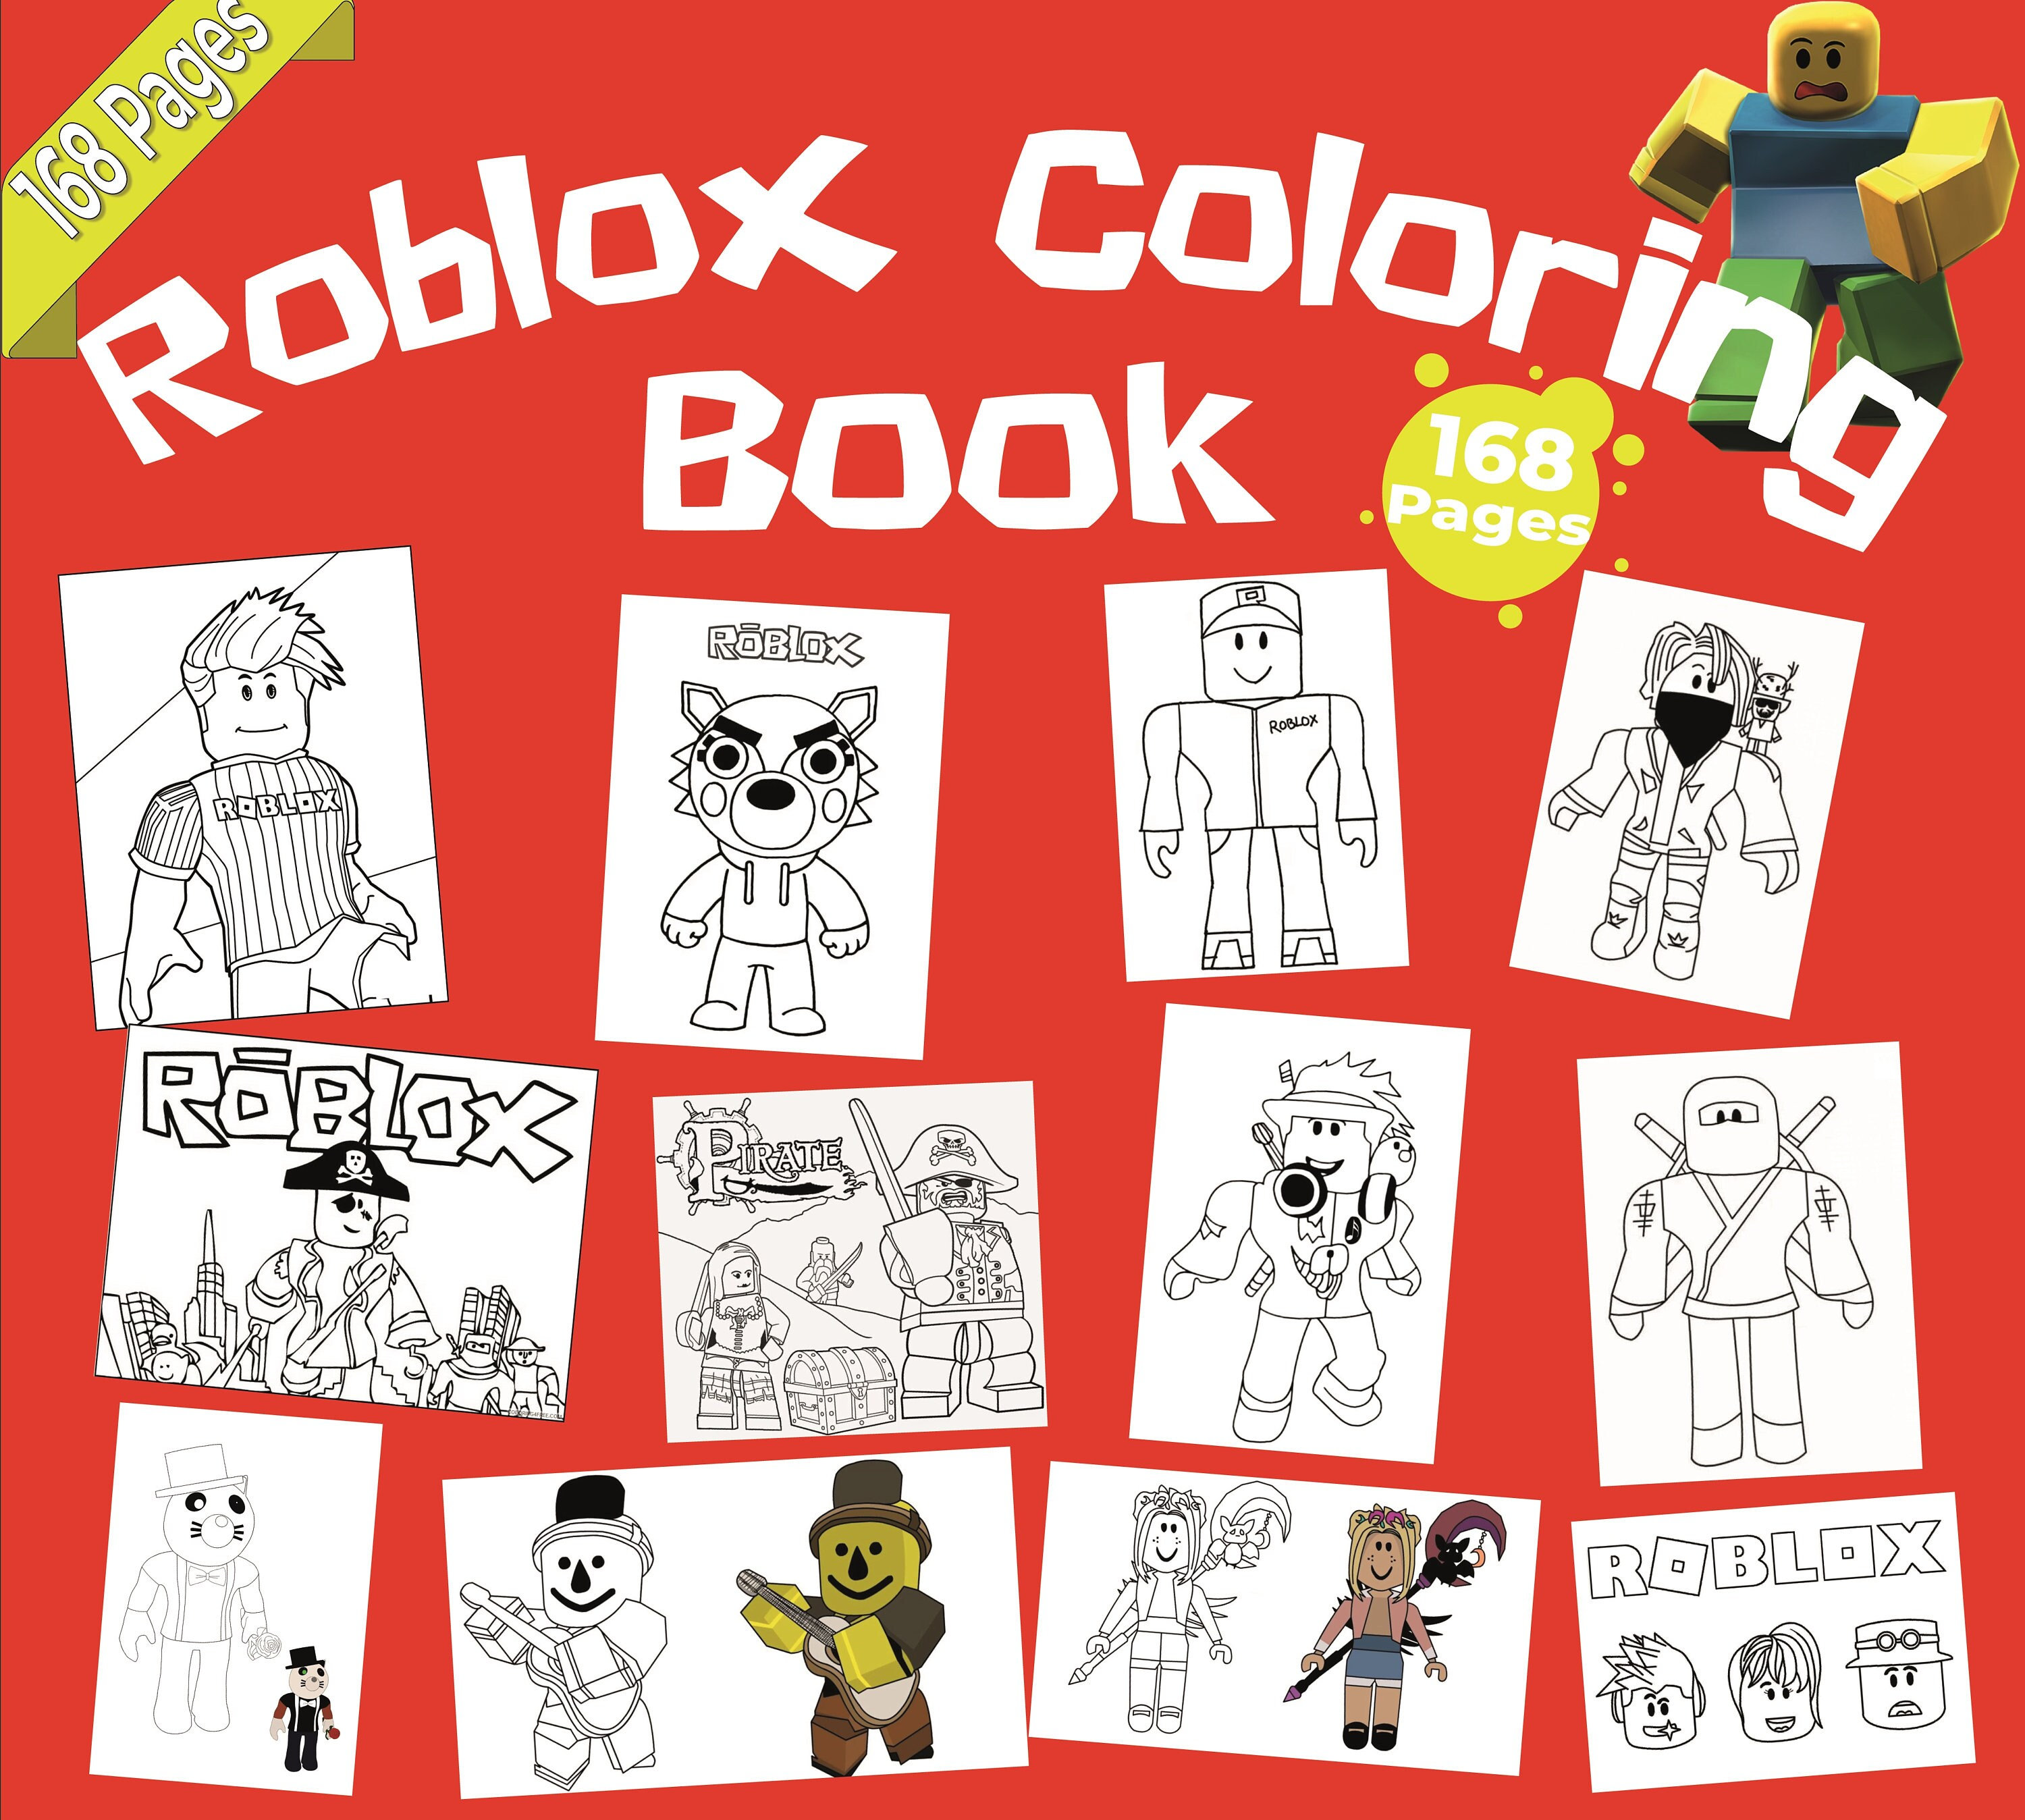 Green Angry Rainbow Friends Roblox Coloring Page  Coloring pages, Cute  doodles drawings, Coloring pages for kids